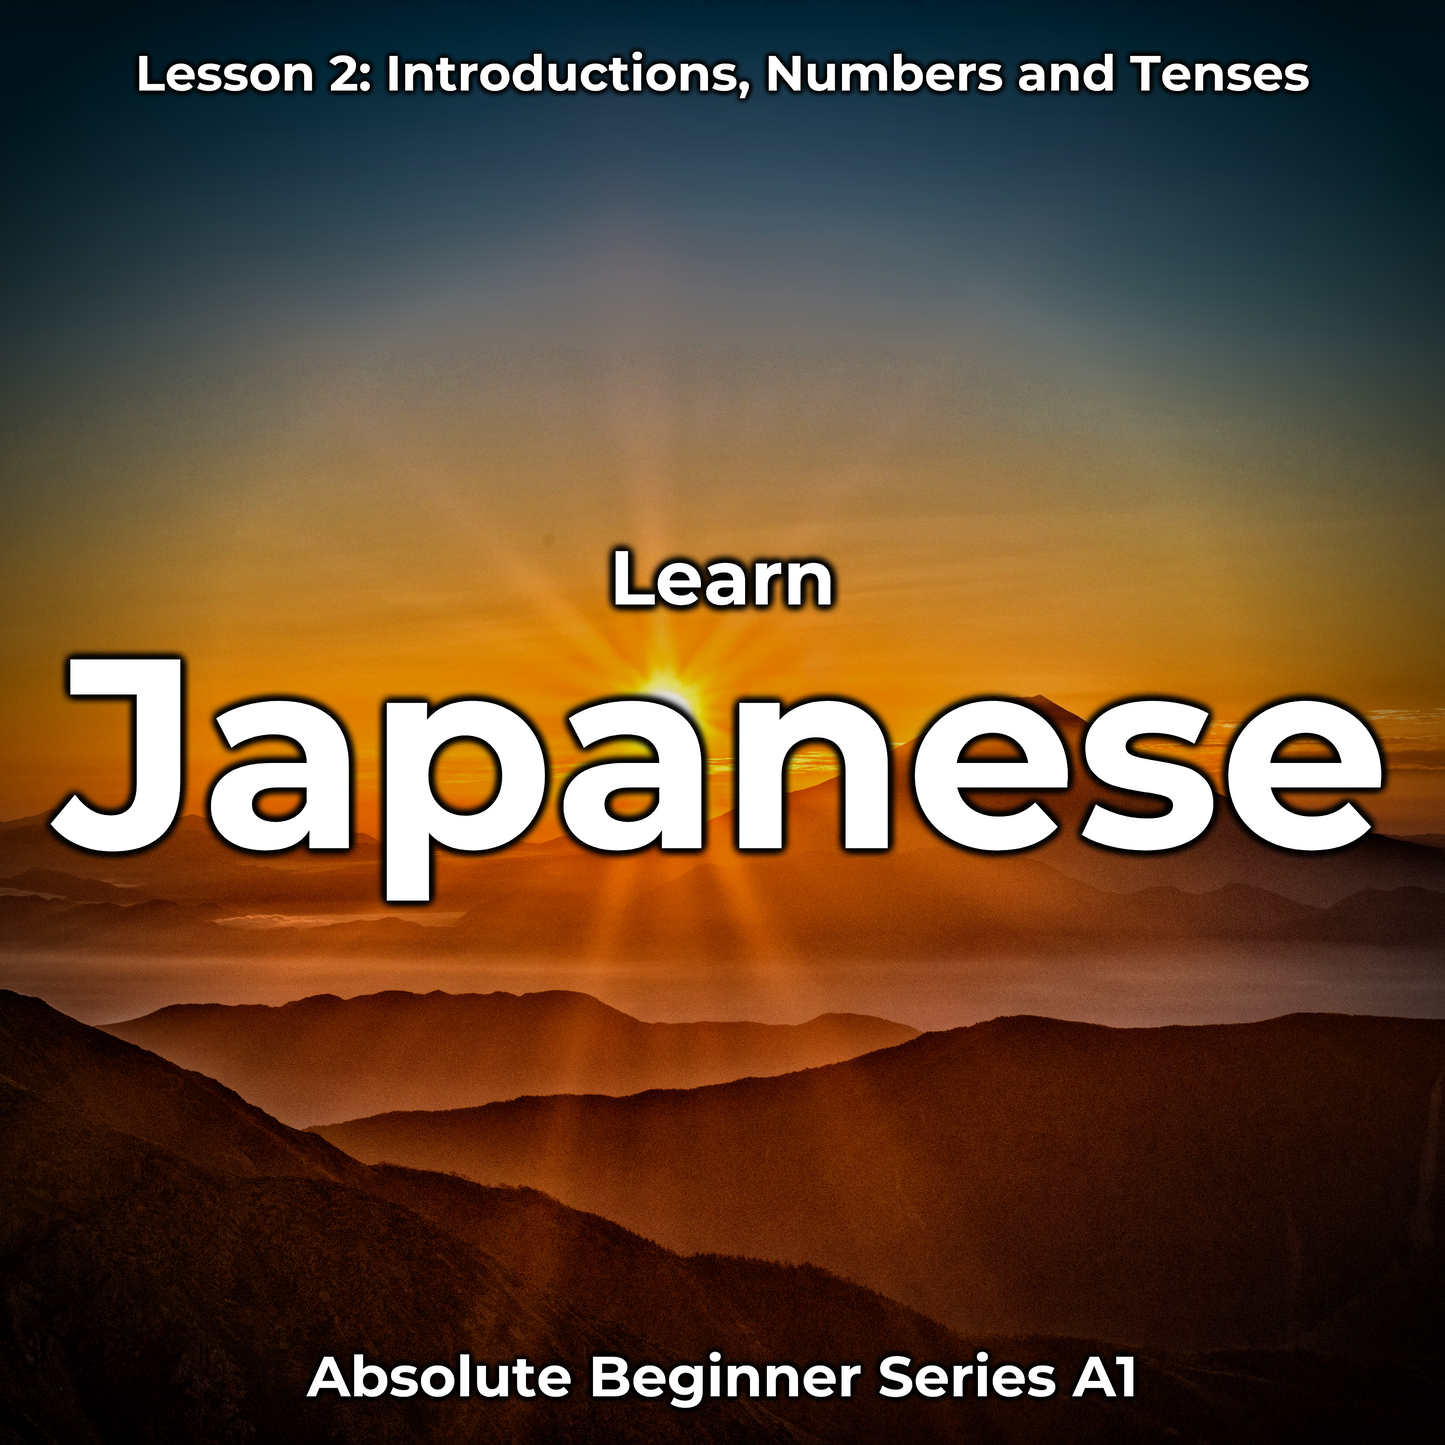 Learn Japanese Lesson 2: Introductions, Numbers and Tenses